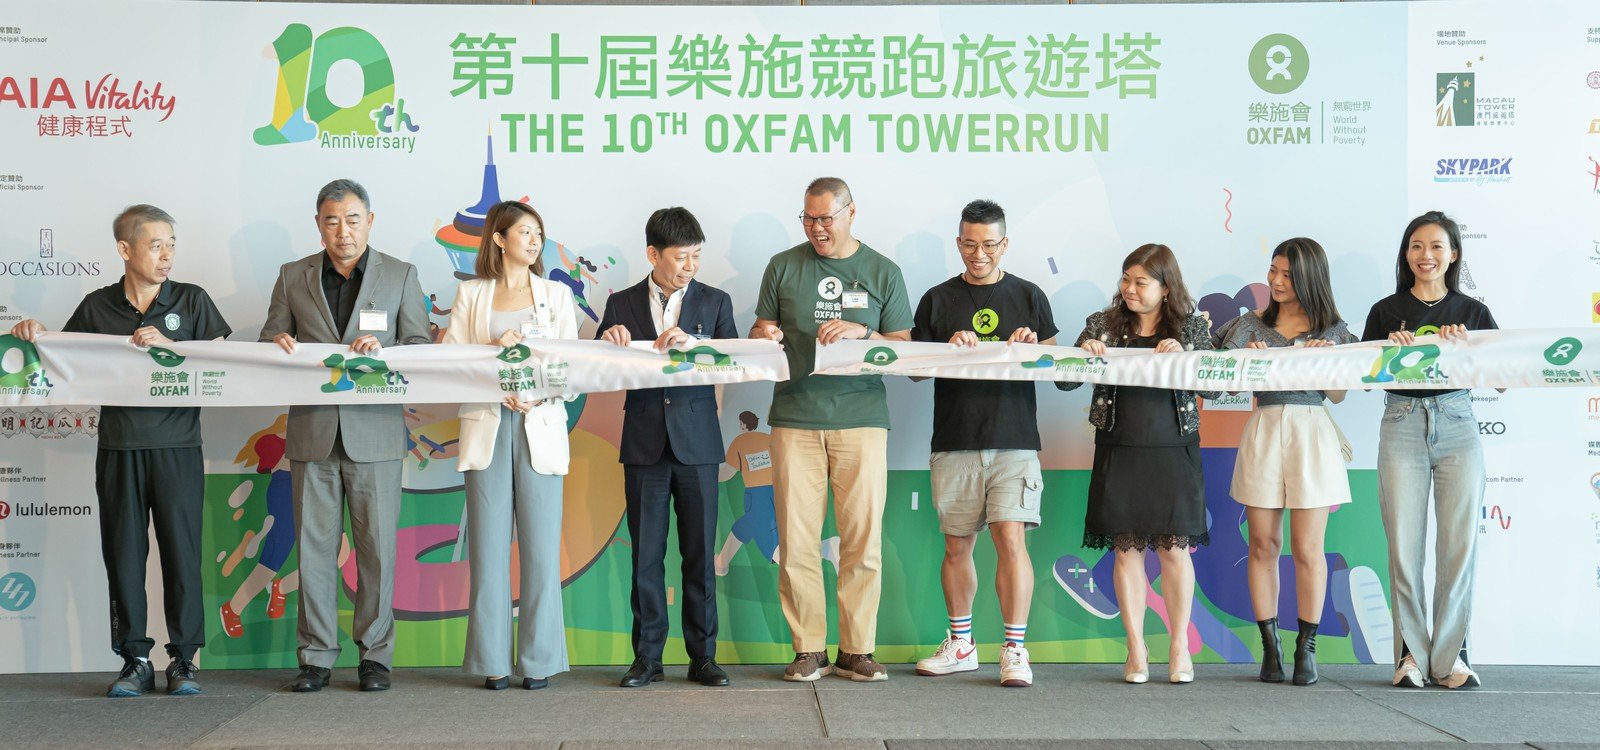 The guests of honour at the 10th Oxfam TowerRun 